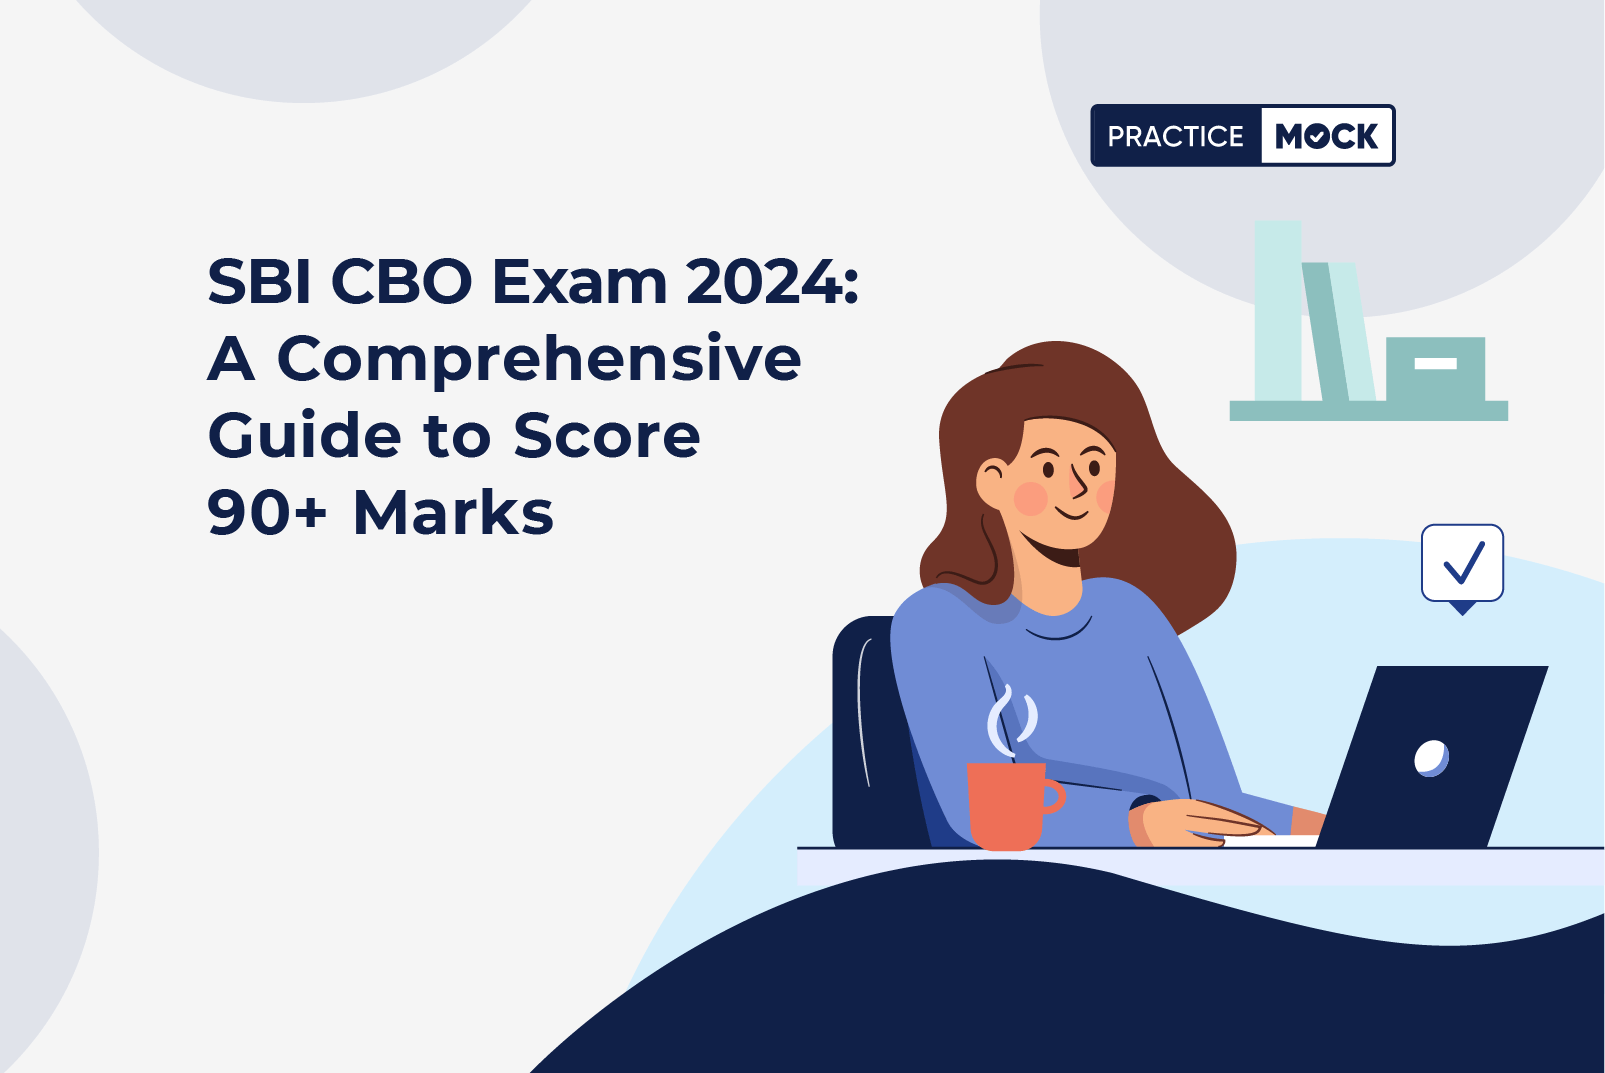 SBI CBO Exam 2024 A Comprehensive Guide to Score 90+ Marks